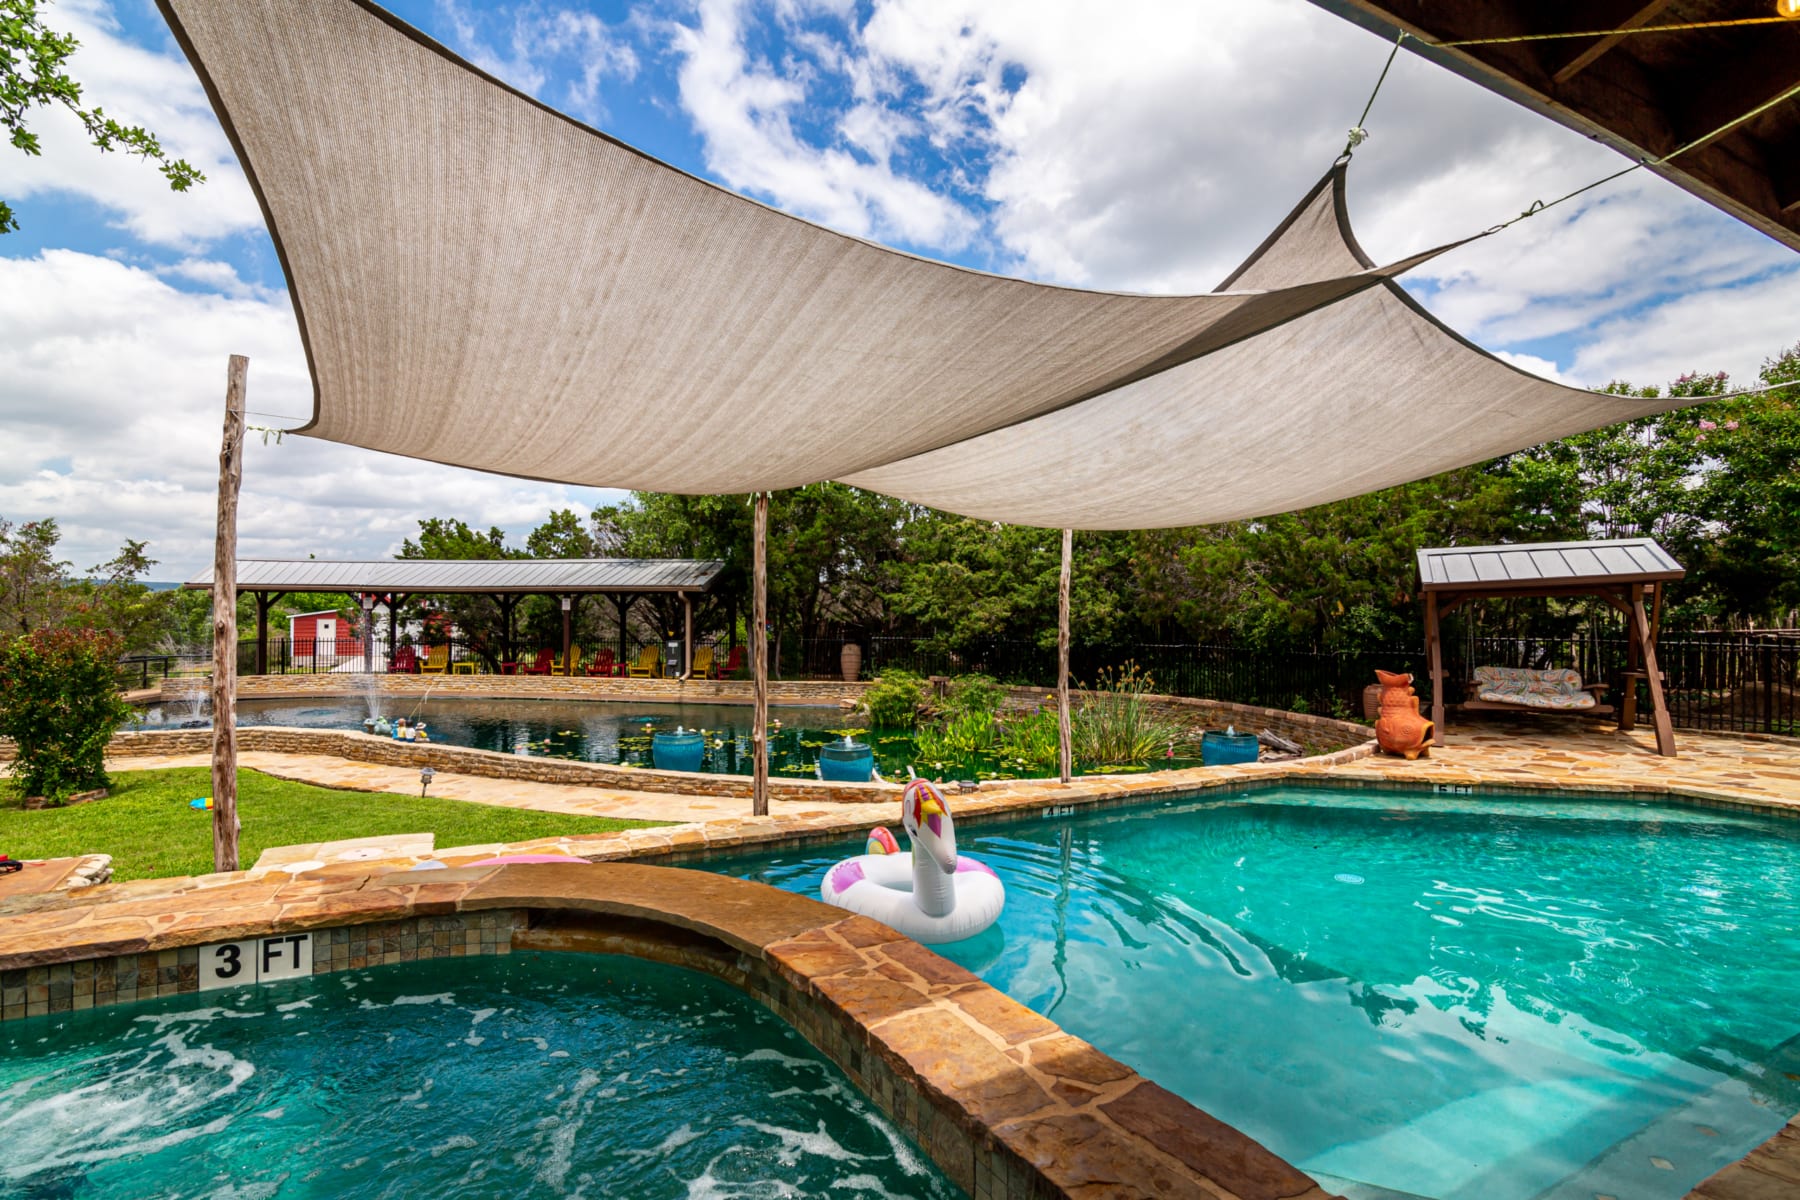 Coyote Moon Lodge - outdoor pool and hot tub overlooking koi pond